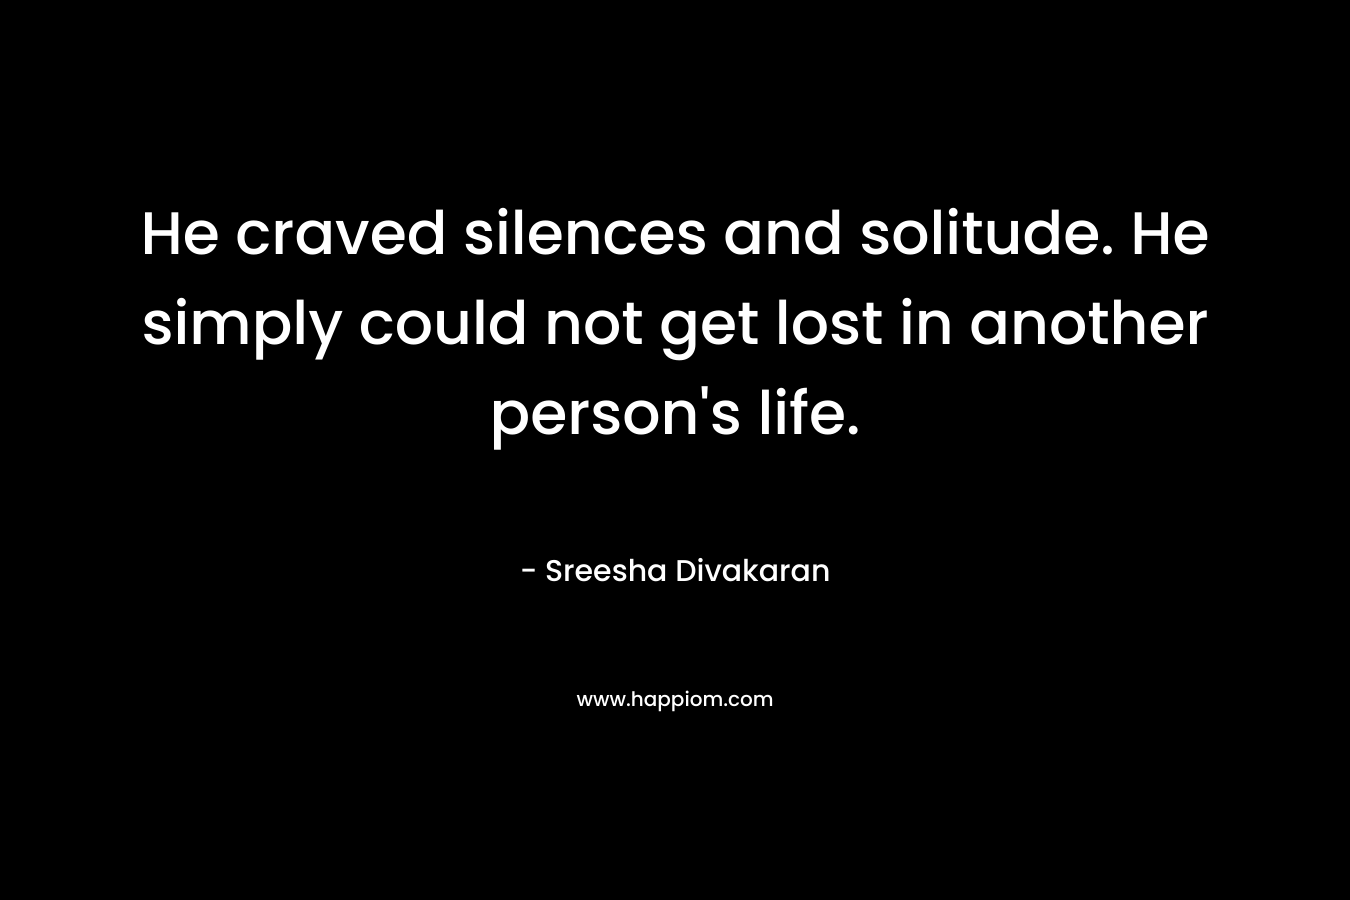 He craved silences and solitude. He simply could not get lost in another person's life.